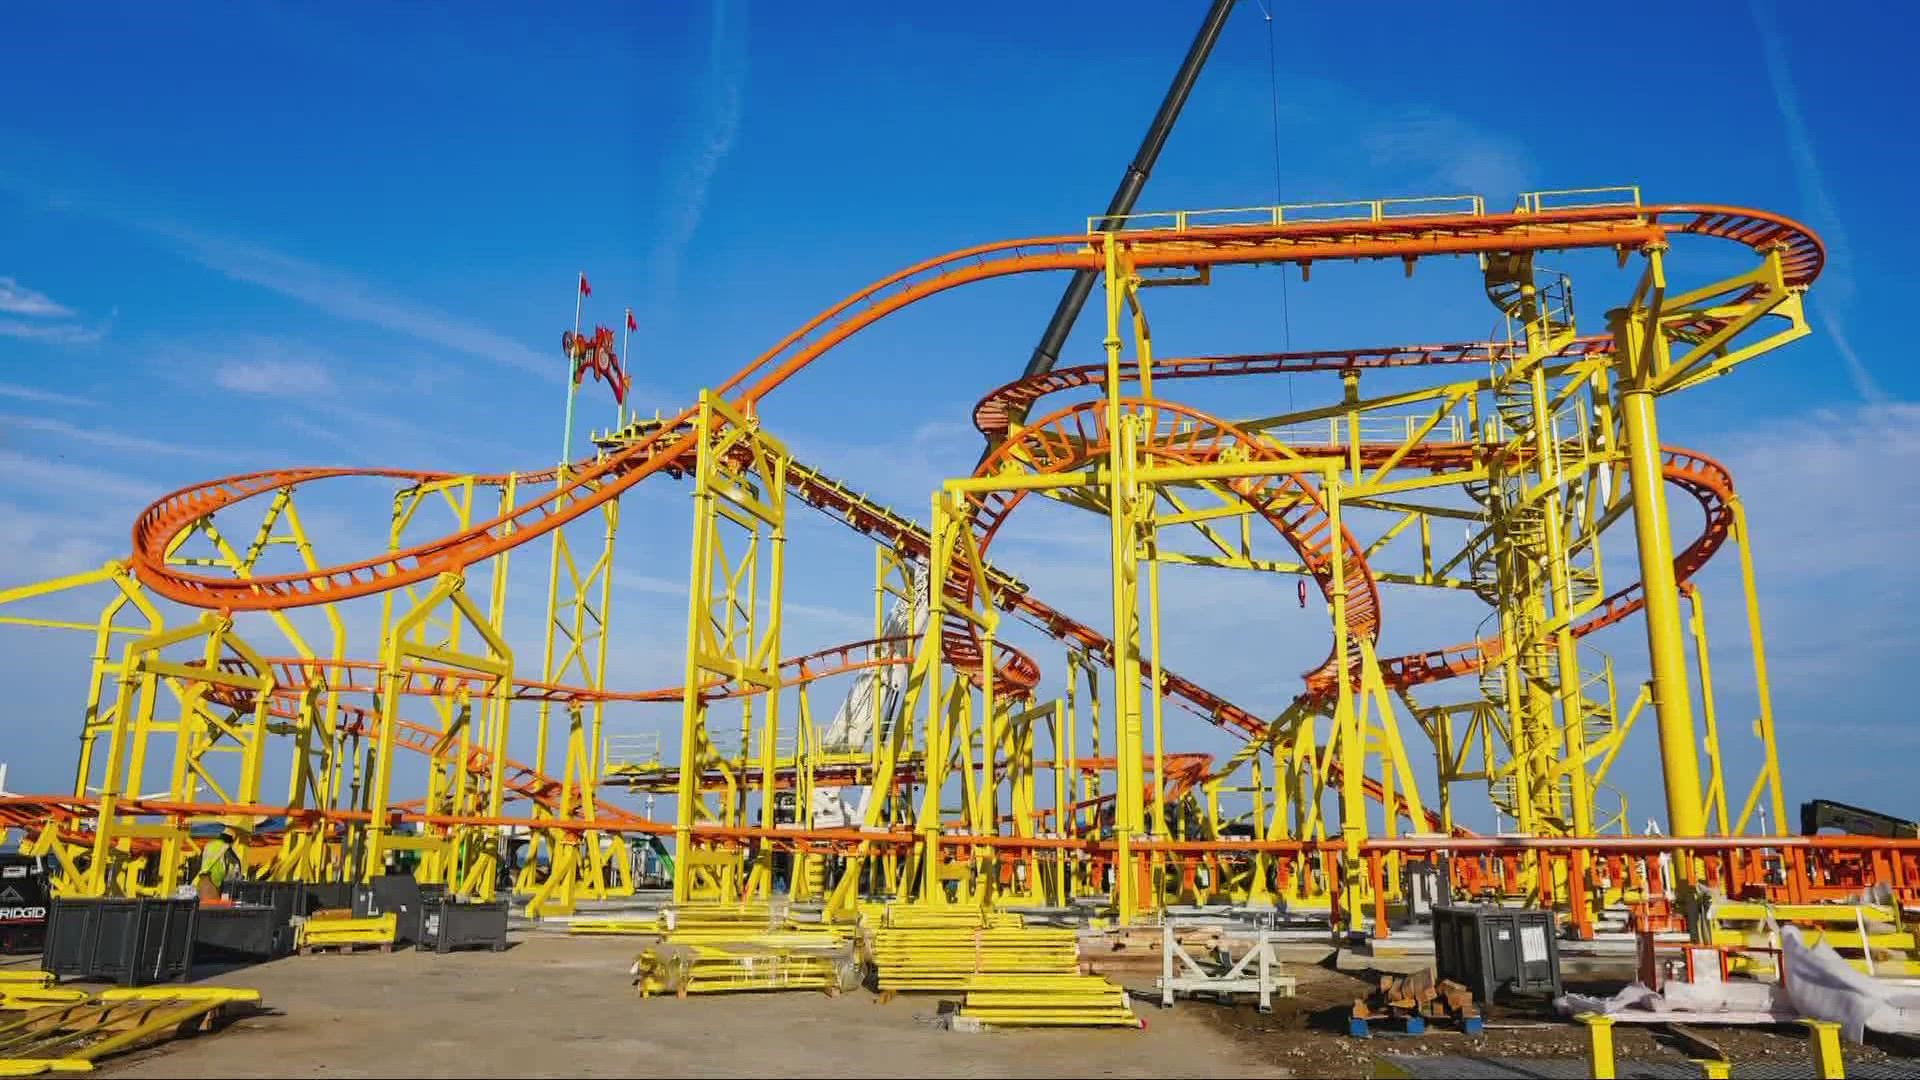 The world-famous amusement park revealed in a social media post that the track to their newest coaster 'Wild Mouse' has been completed.